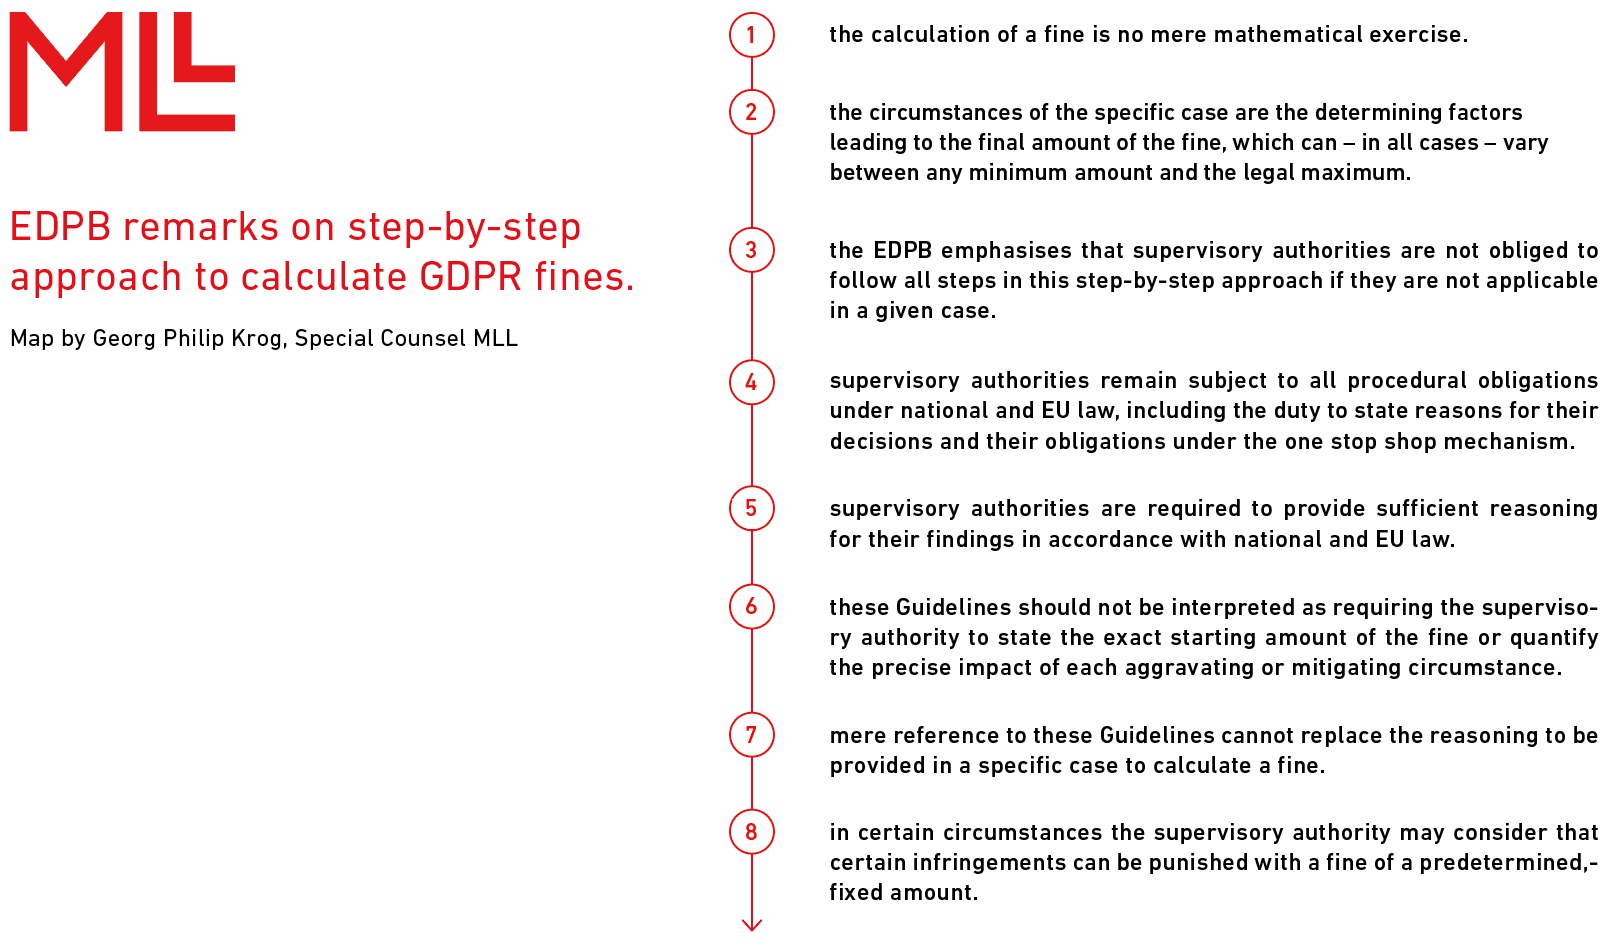 EDPB-remarks-on-step-by-step-approach-to-calculate-GDPR-fines